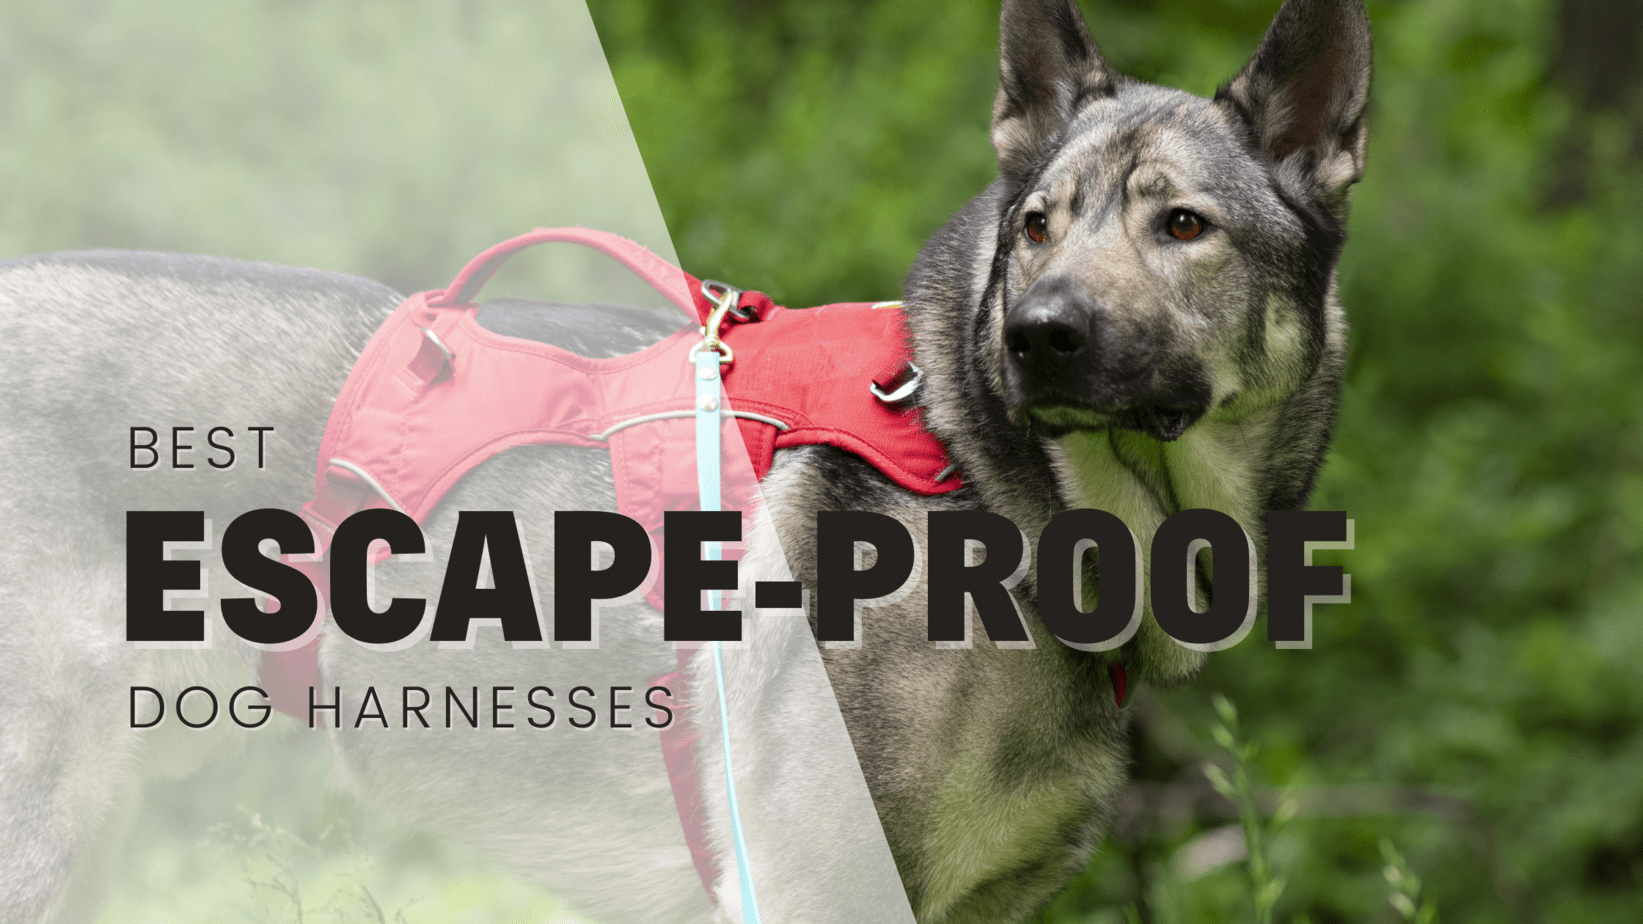 14 Best Escape Proof Dog Harnesses - According To A Pro Trainer